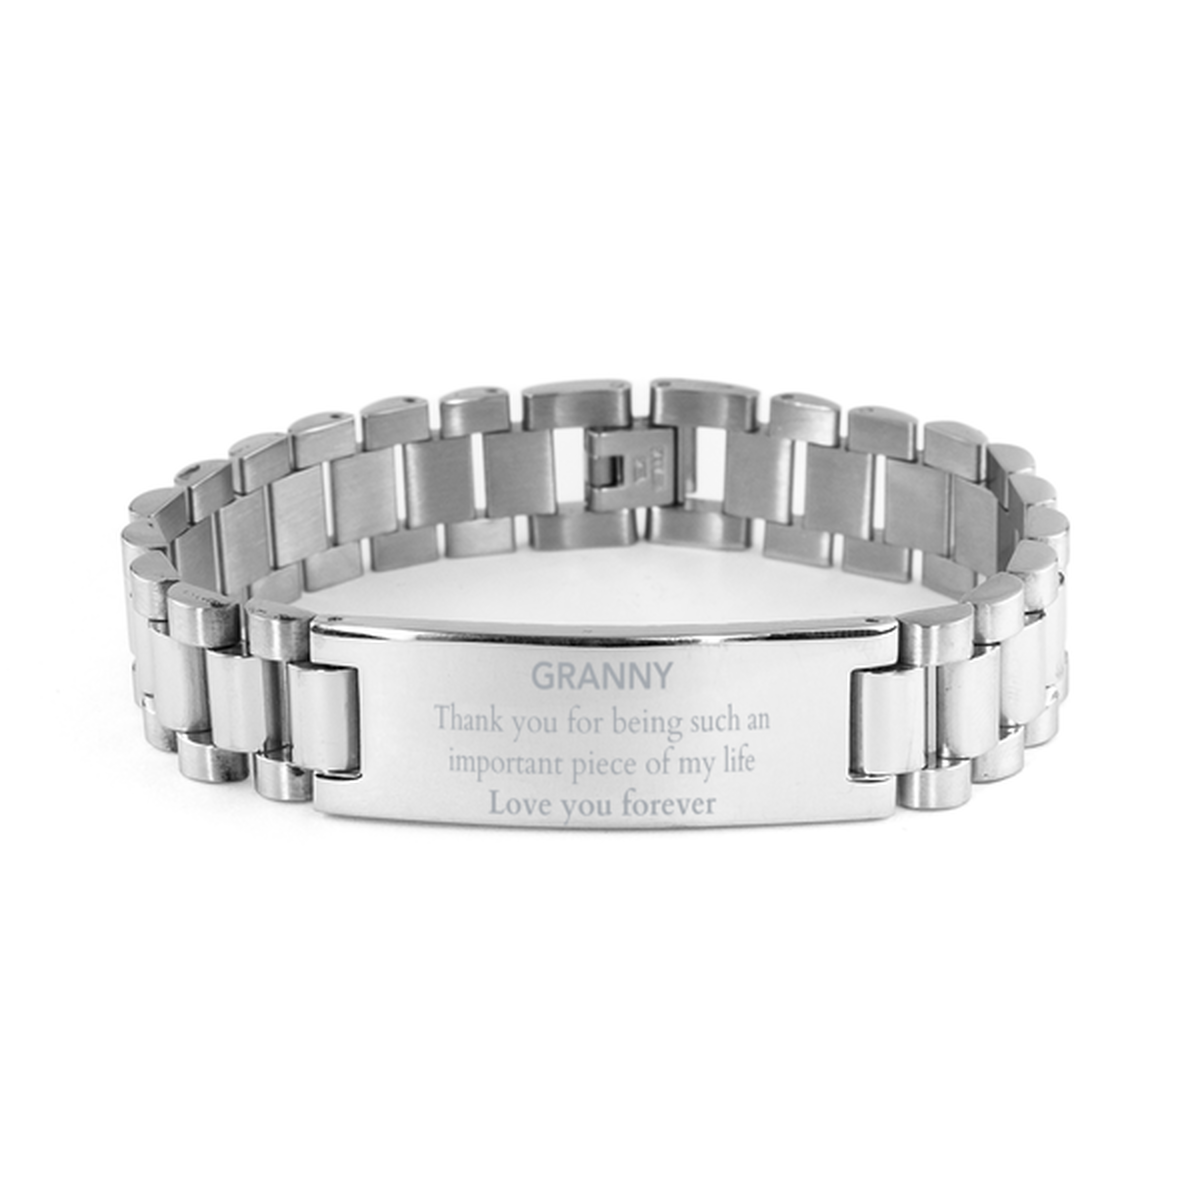 Appropriate Granny Ladder Stainless Steel Bracelet Epic Birthday Gifts for Granny Thank you for being such an important piece of my life Granny Christmas Mothers Fathers Day